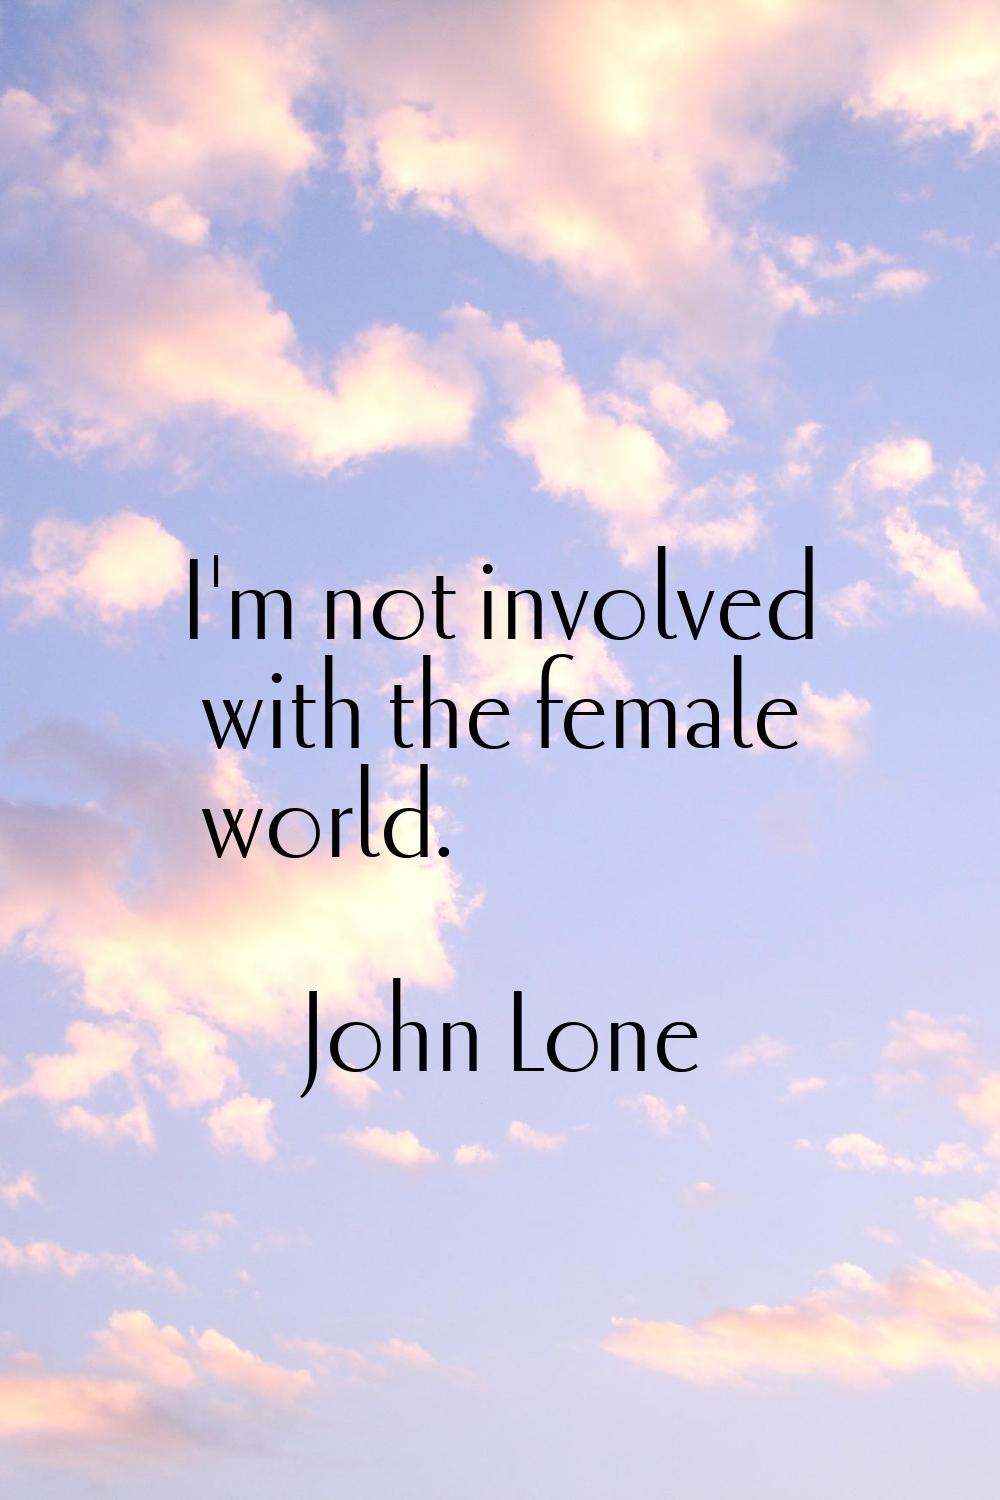 I'm not involved with the female world.